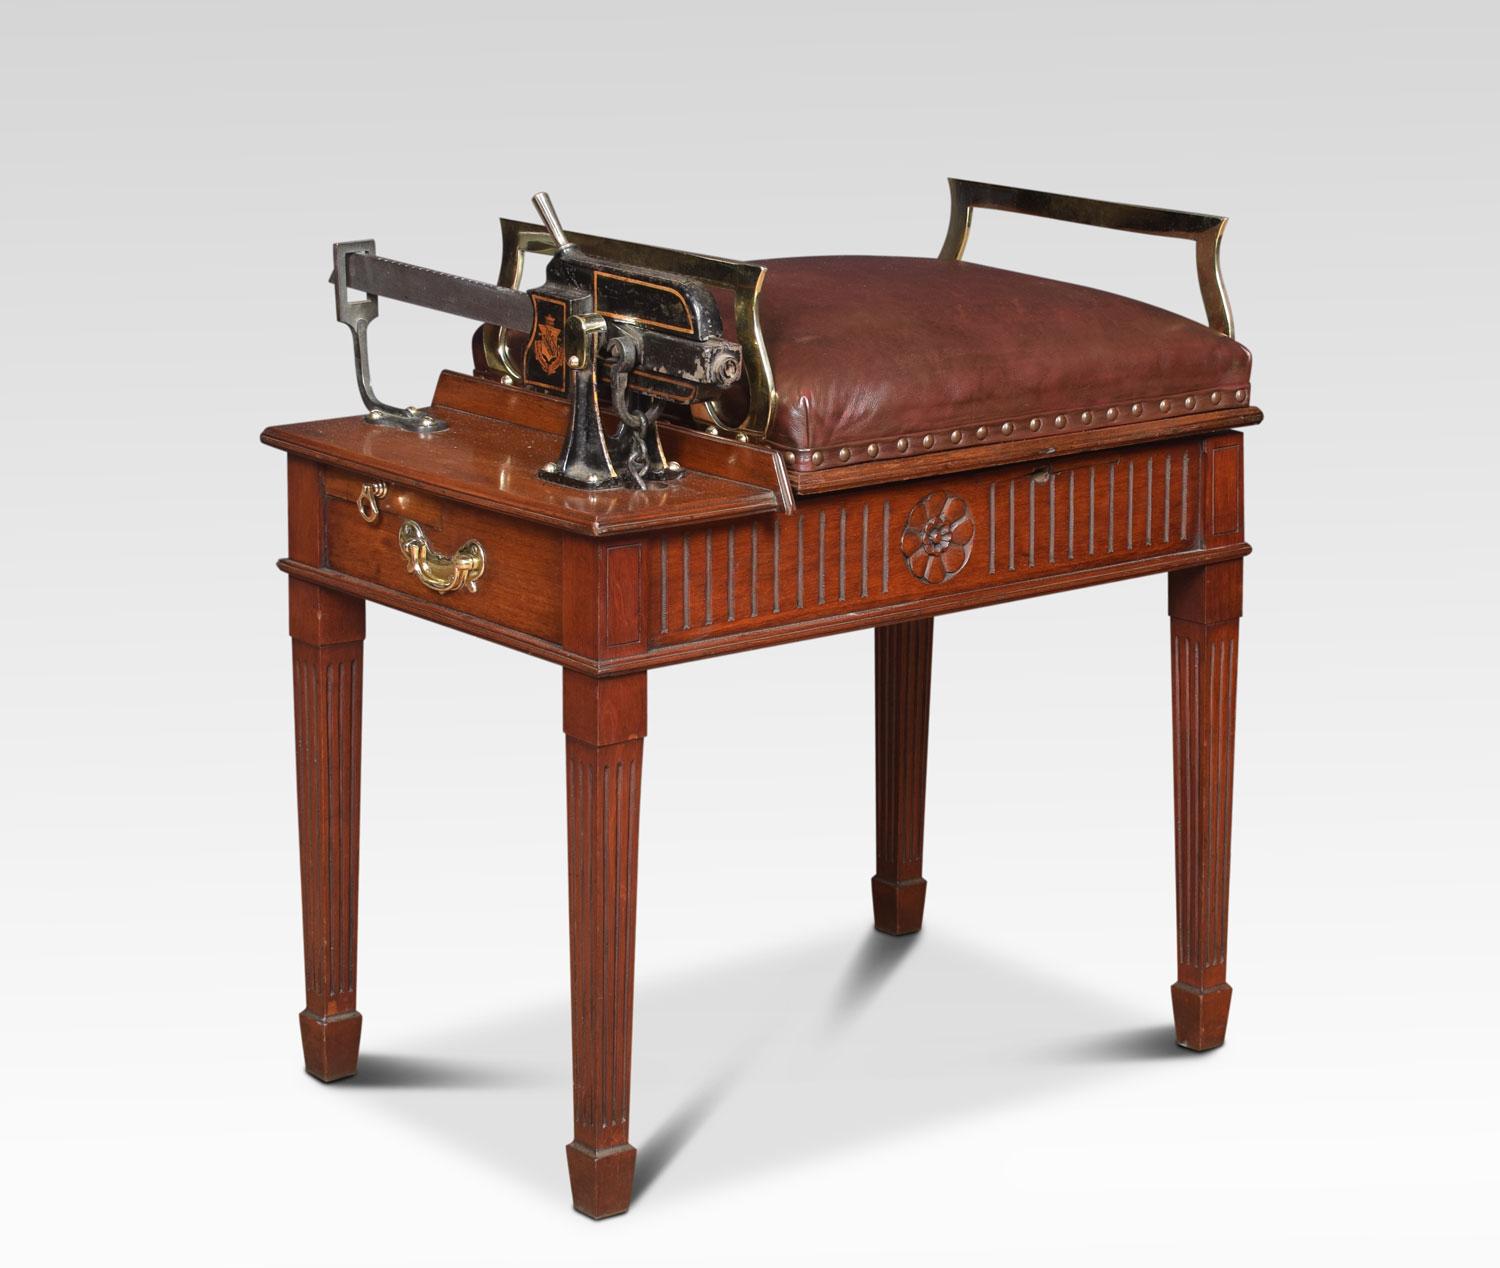 Avery Jockey scales the seat upholstered in leather above the mahogany base with carved frieze raised up on four squares tapering fluted legs
Dimensions:
Height 27.5 inches
Length 25.5 inches
width 19 inches.